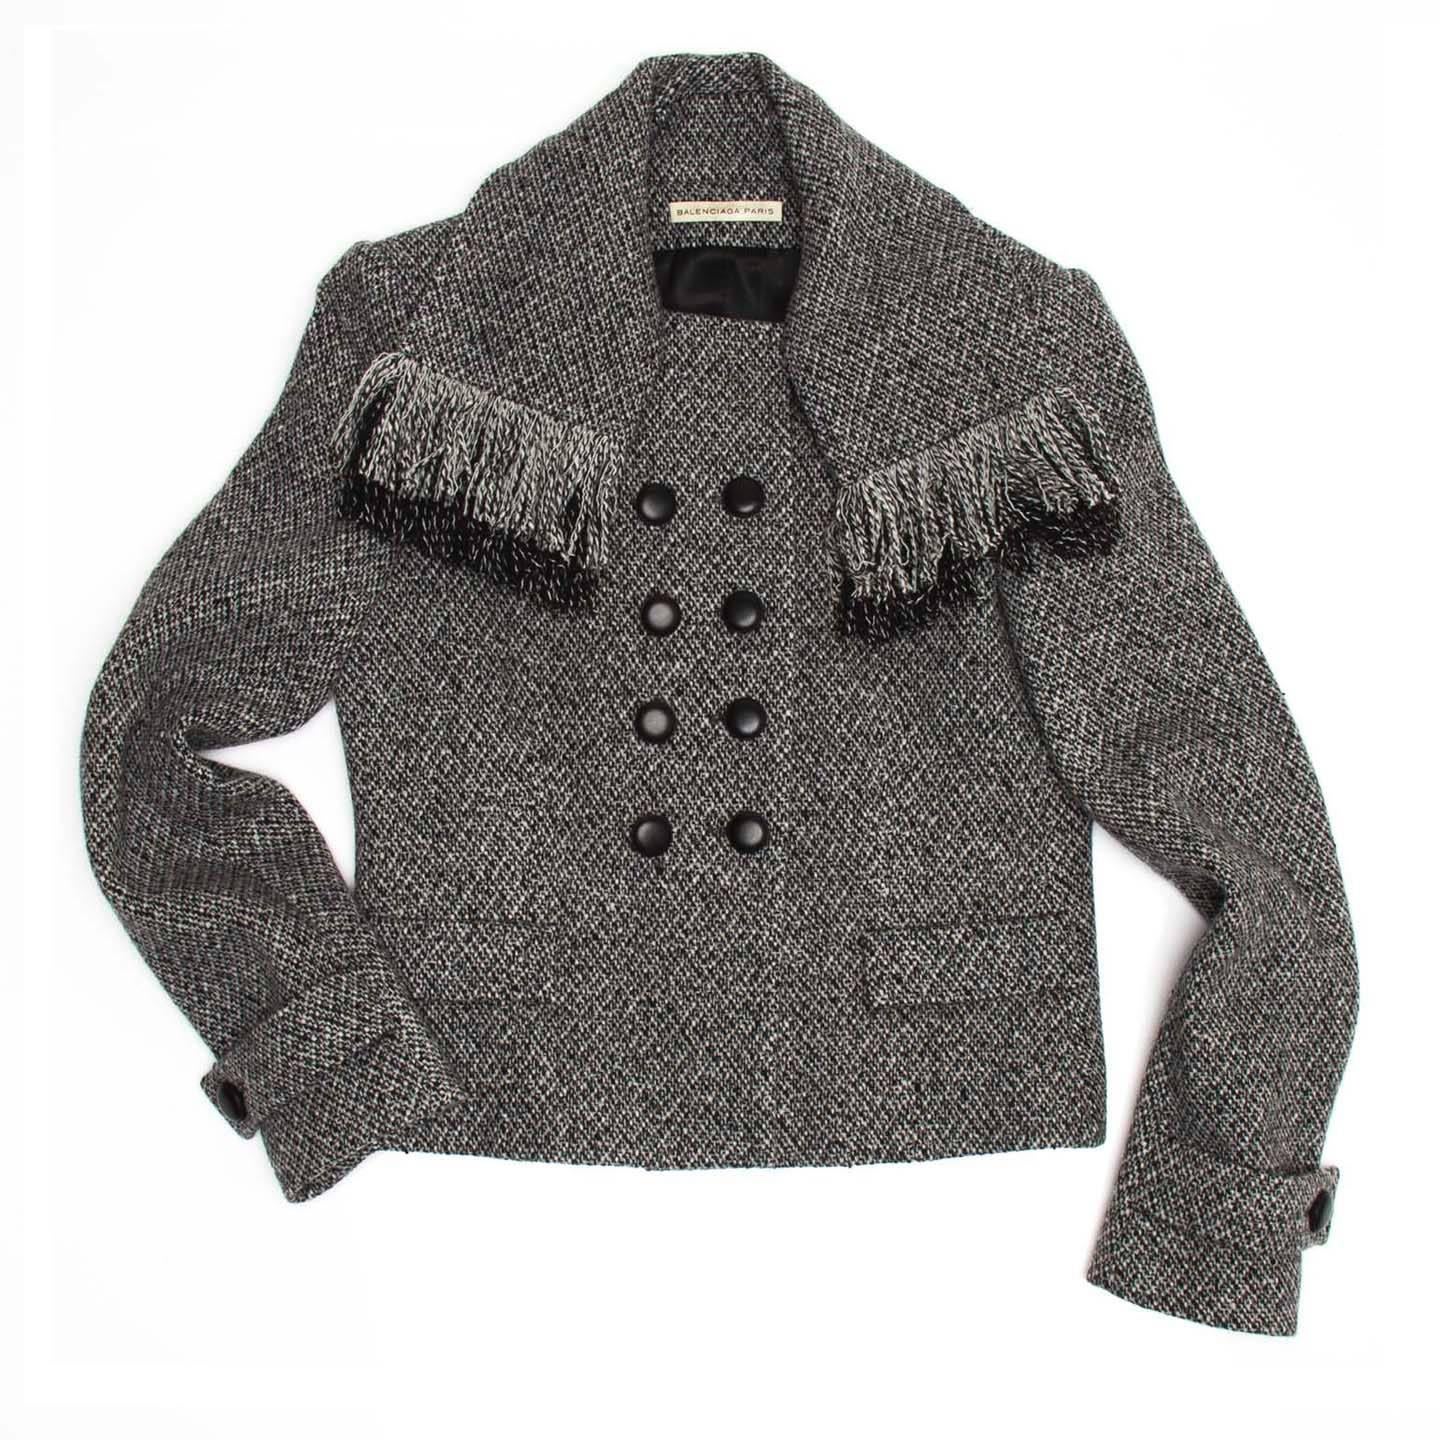 Grey tweed wool short jacket with scarf collar detail enriched by fringes. The jacket is shaped at waist and it has a small double breasted closure with black buttons. The front is enriched by flap pockets and the cuffs are belted. Made in